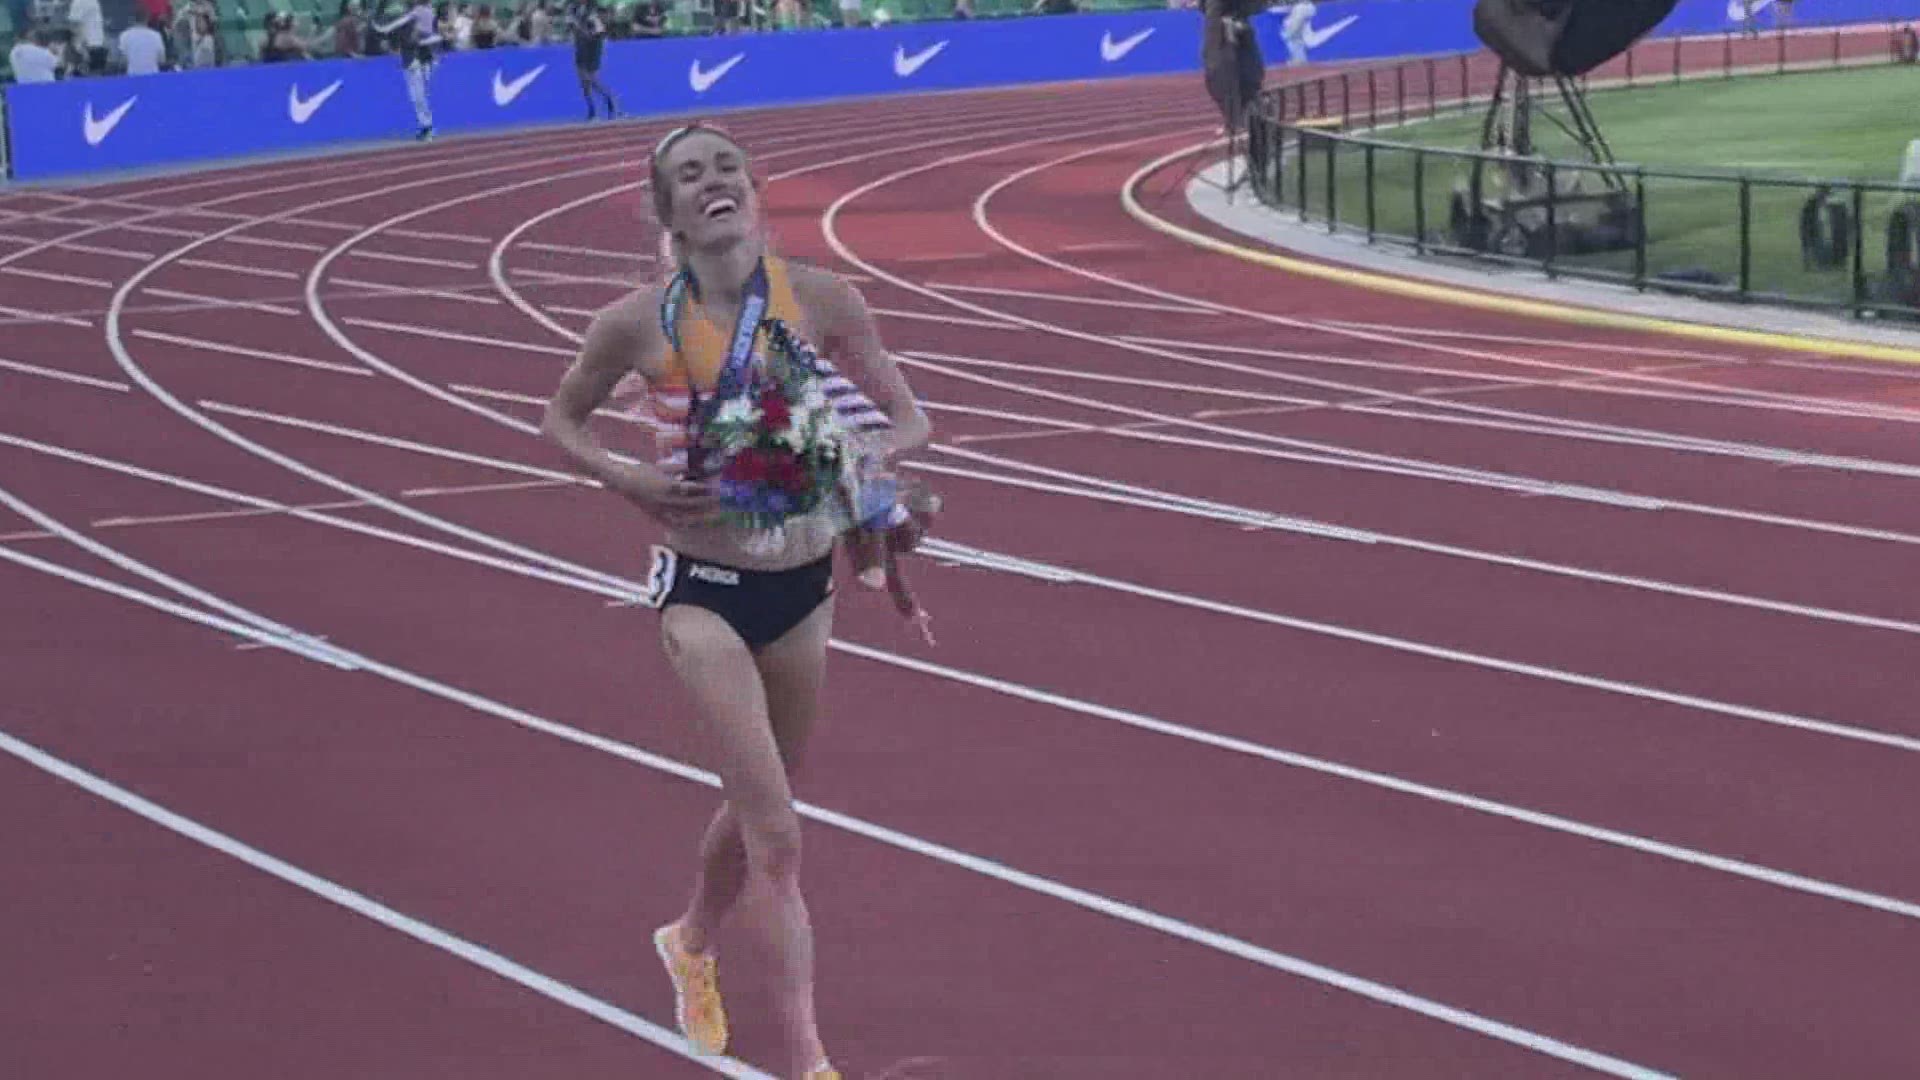 Sanford native, Rachel Schneider, qualified for the 5 thousand meter race in the Tokyo Olympics on Monday.